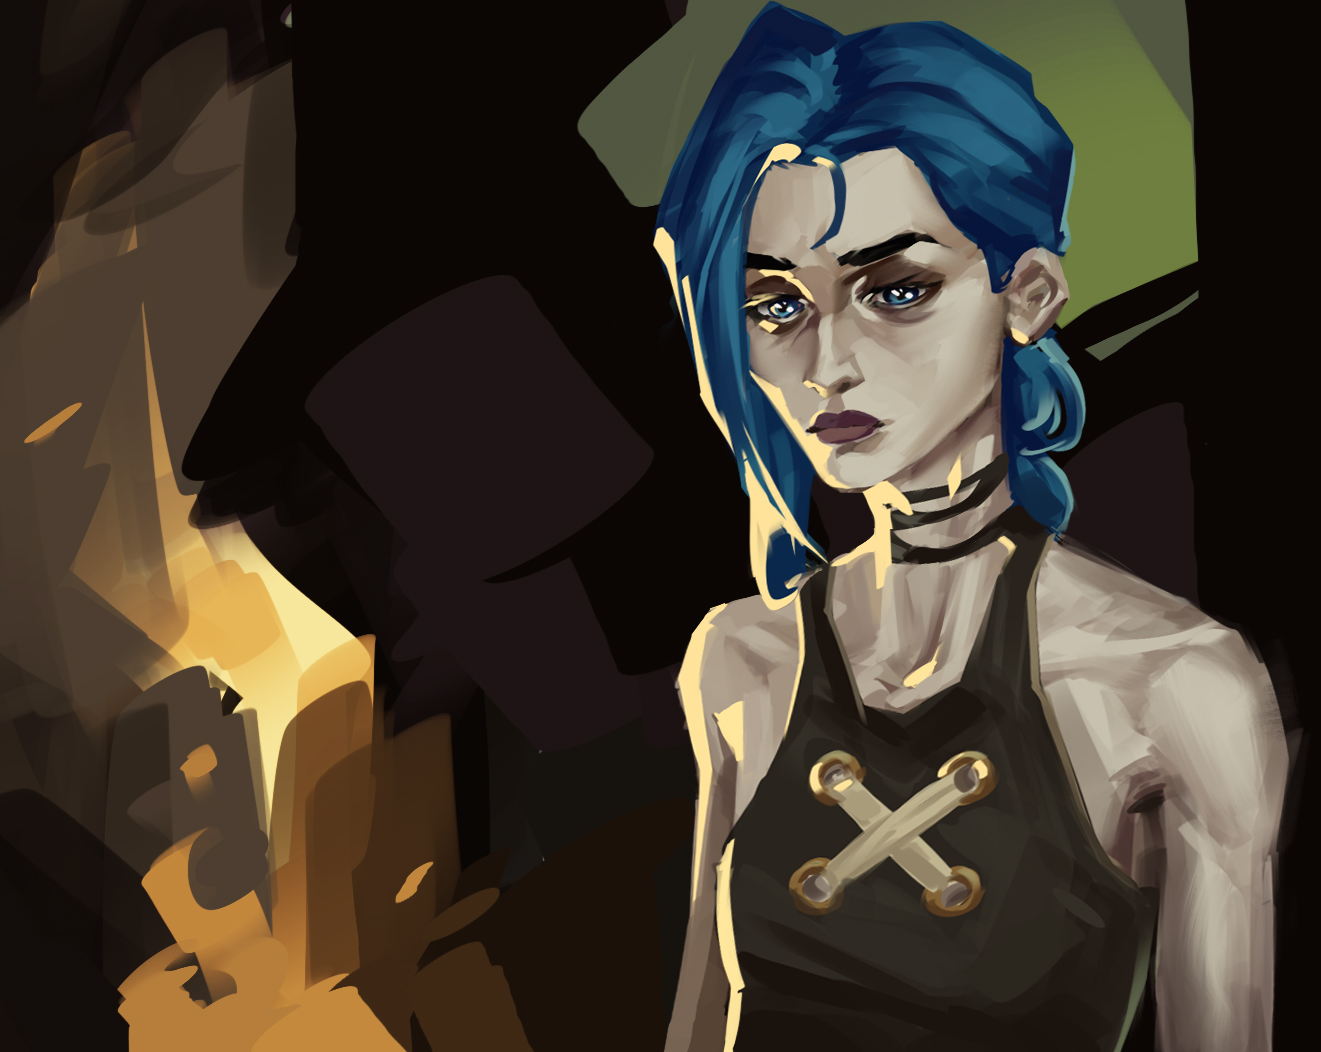 Image of Jinx from Arcane / League of Legends.